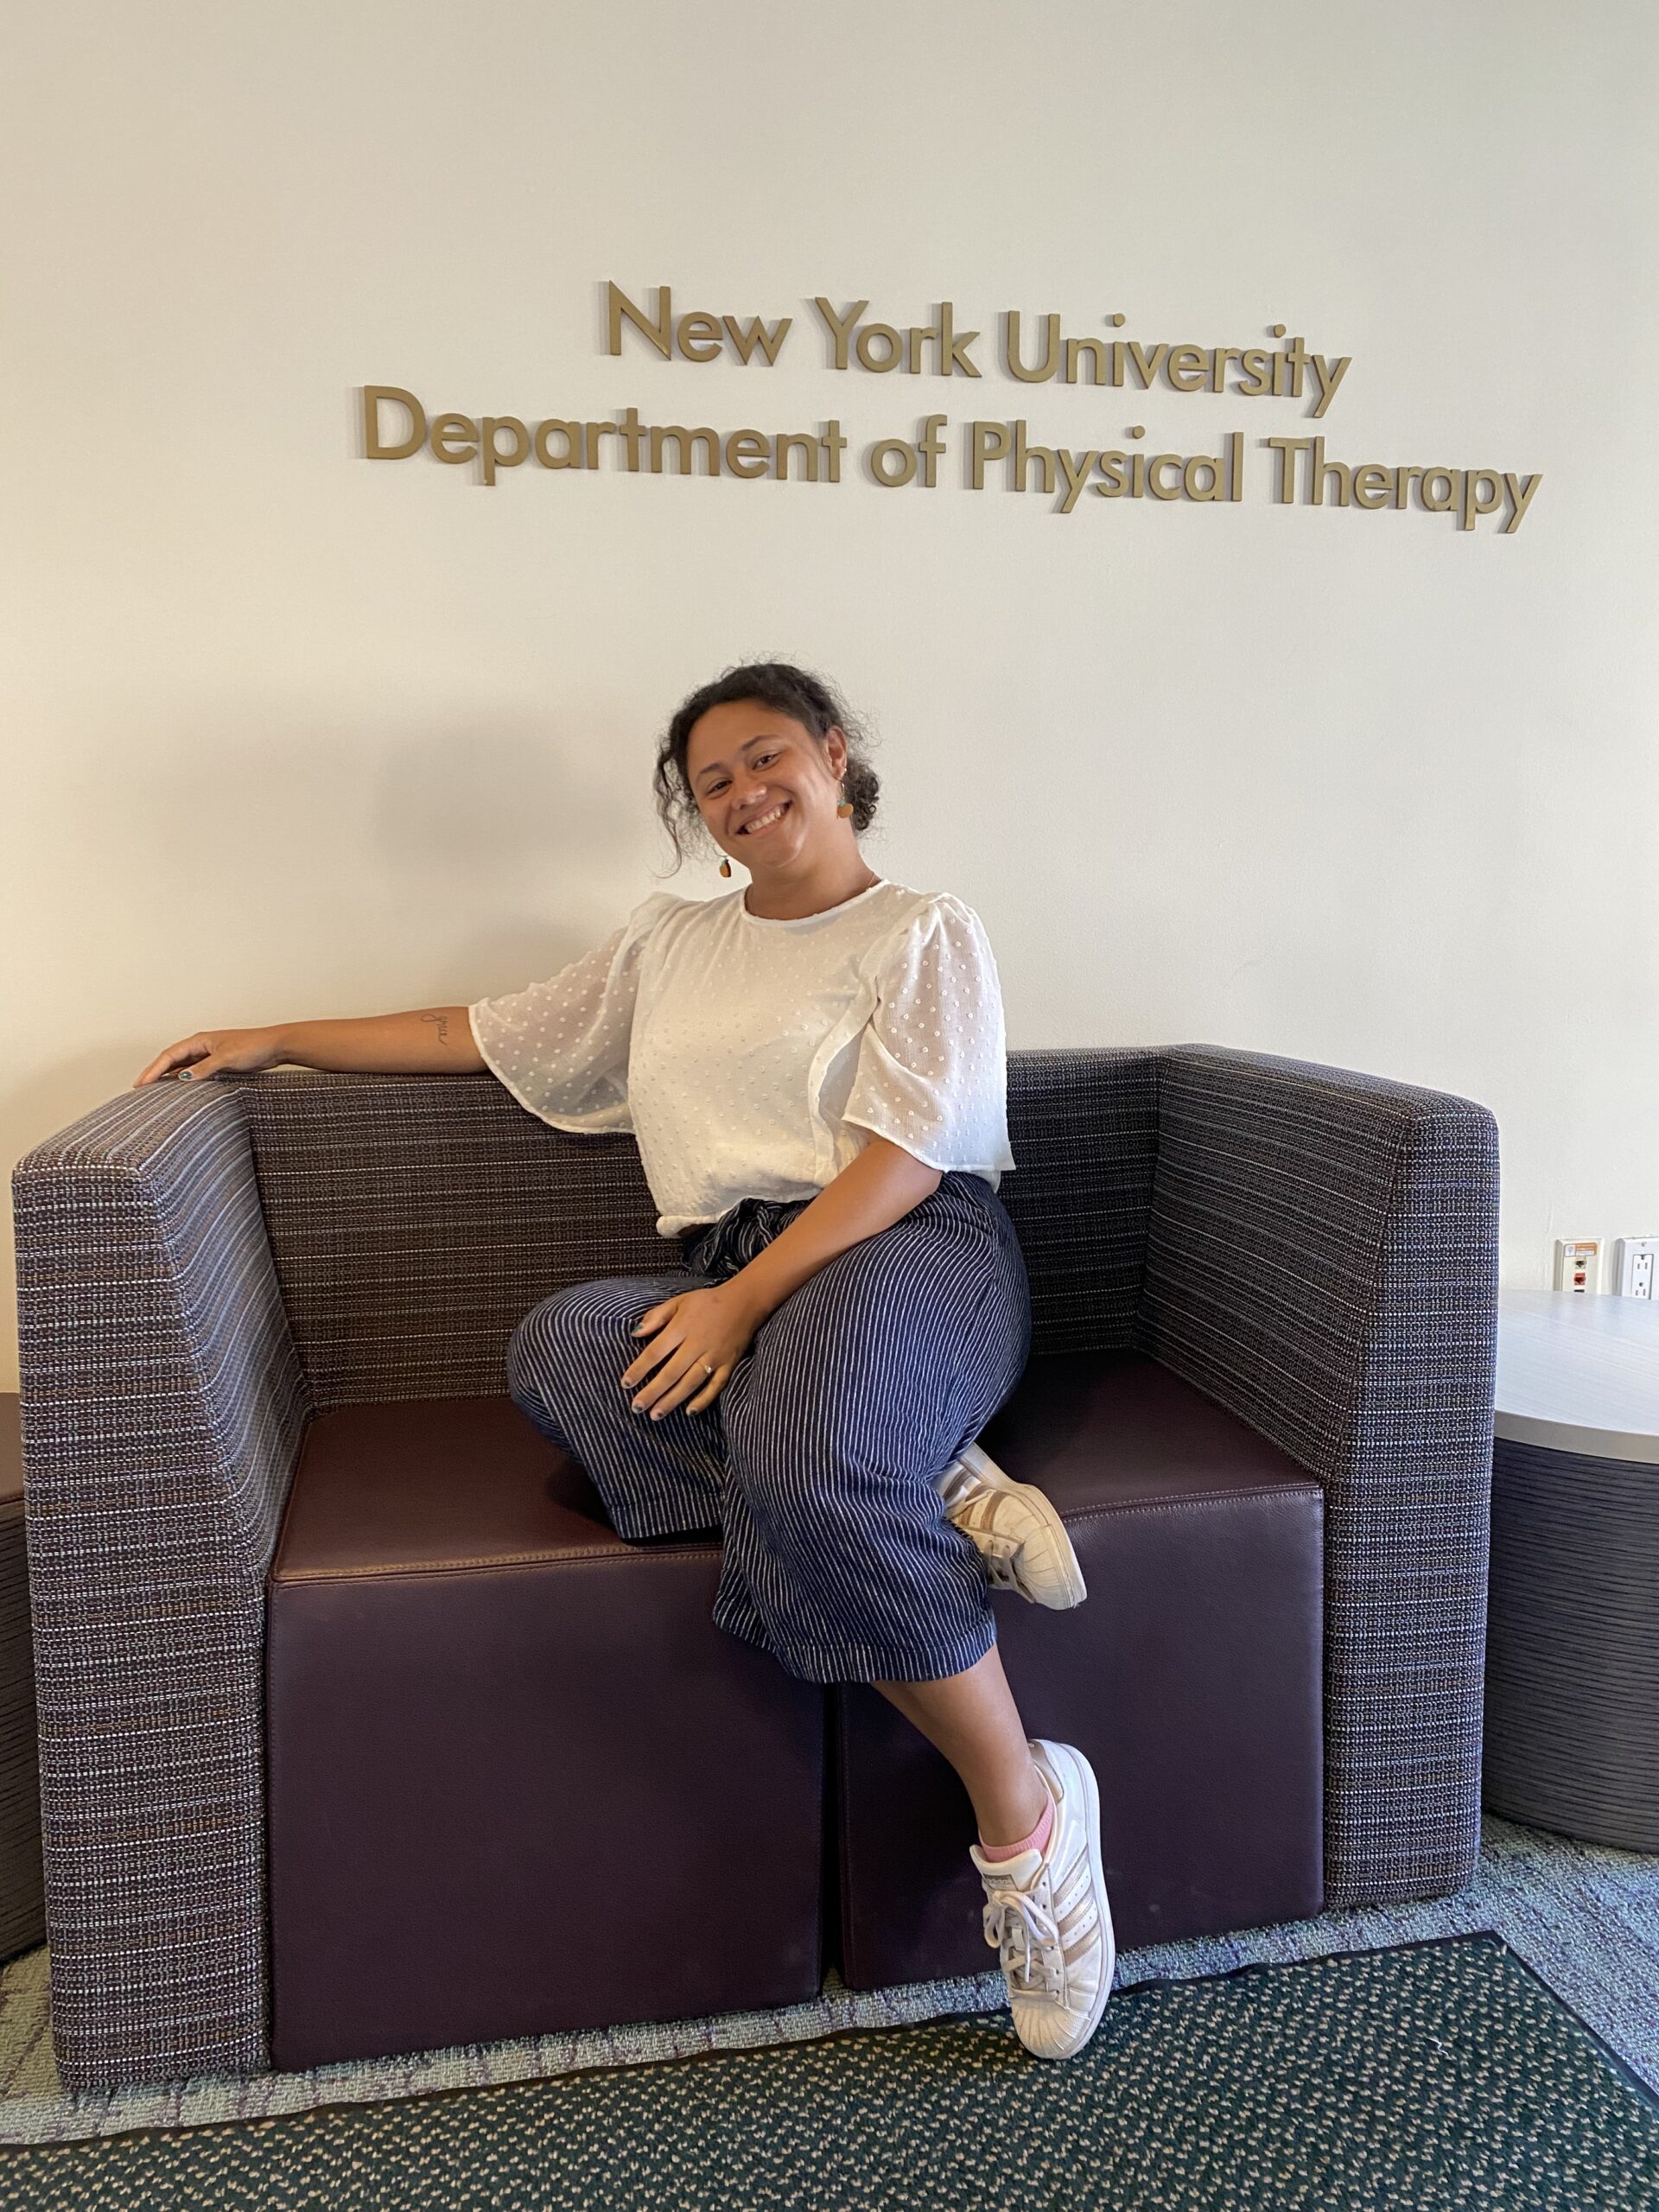  Suzanne Roudebush at the Department of Physical Therapy at New York University